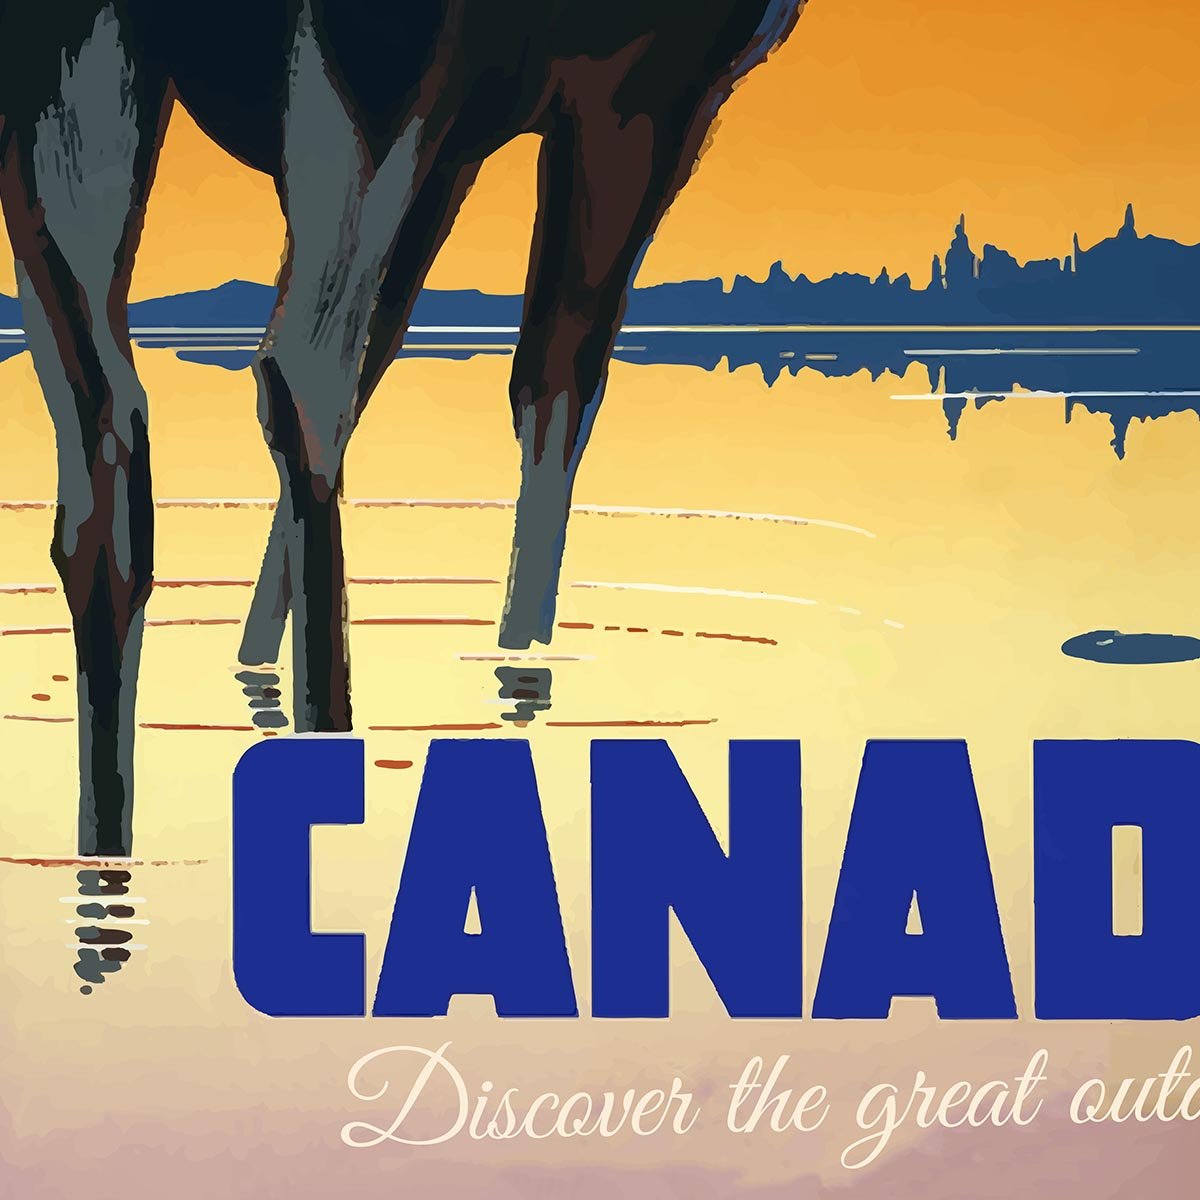 Canada Travel Poster